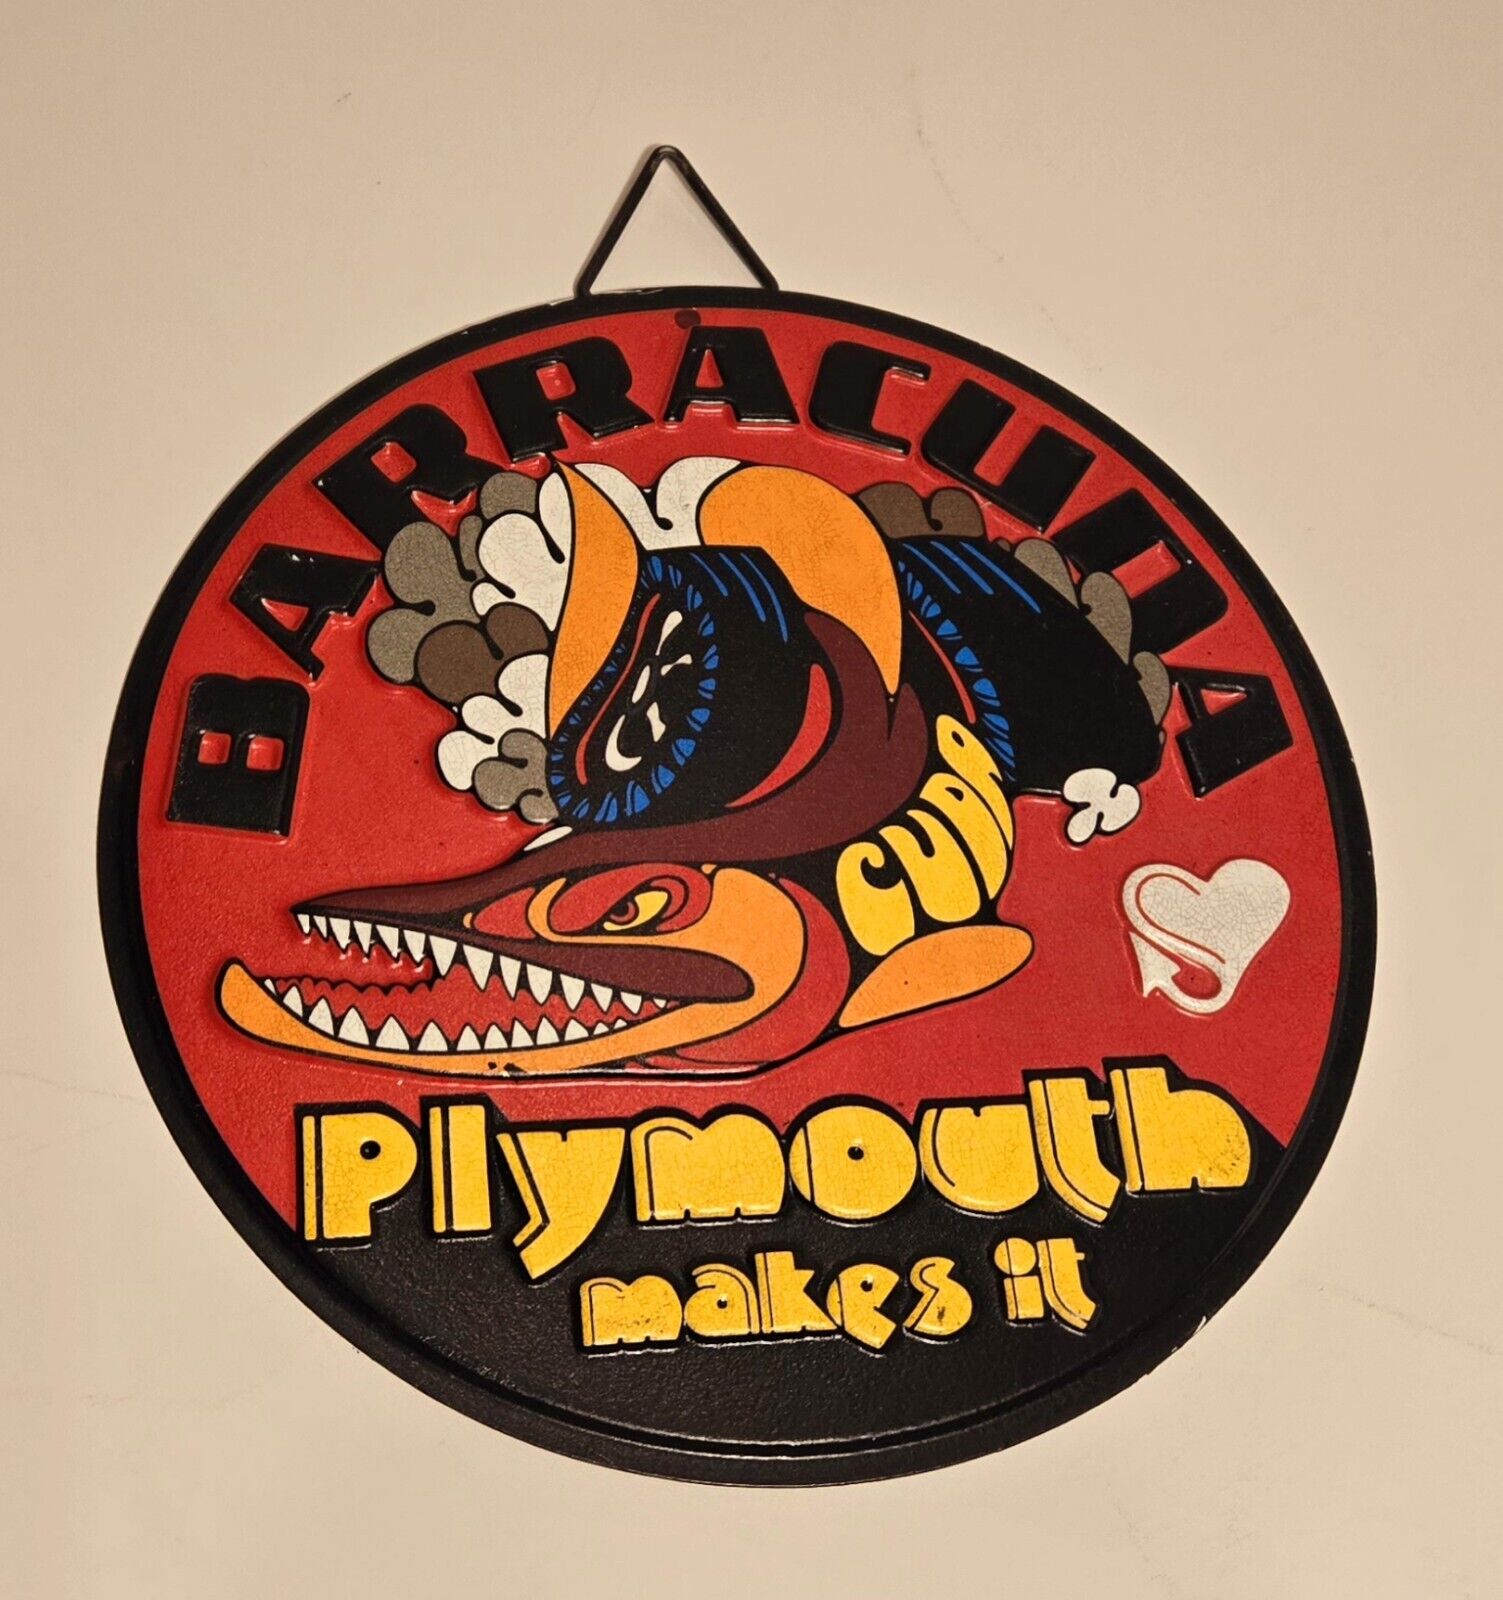 Barracuda Plymouth Makes it Round Retro Style Garage Metal Auto Wall Sign NEW 